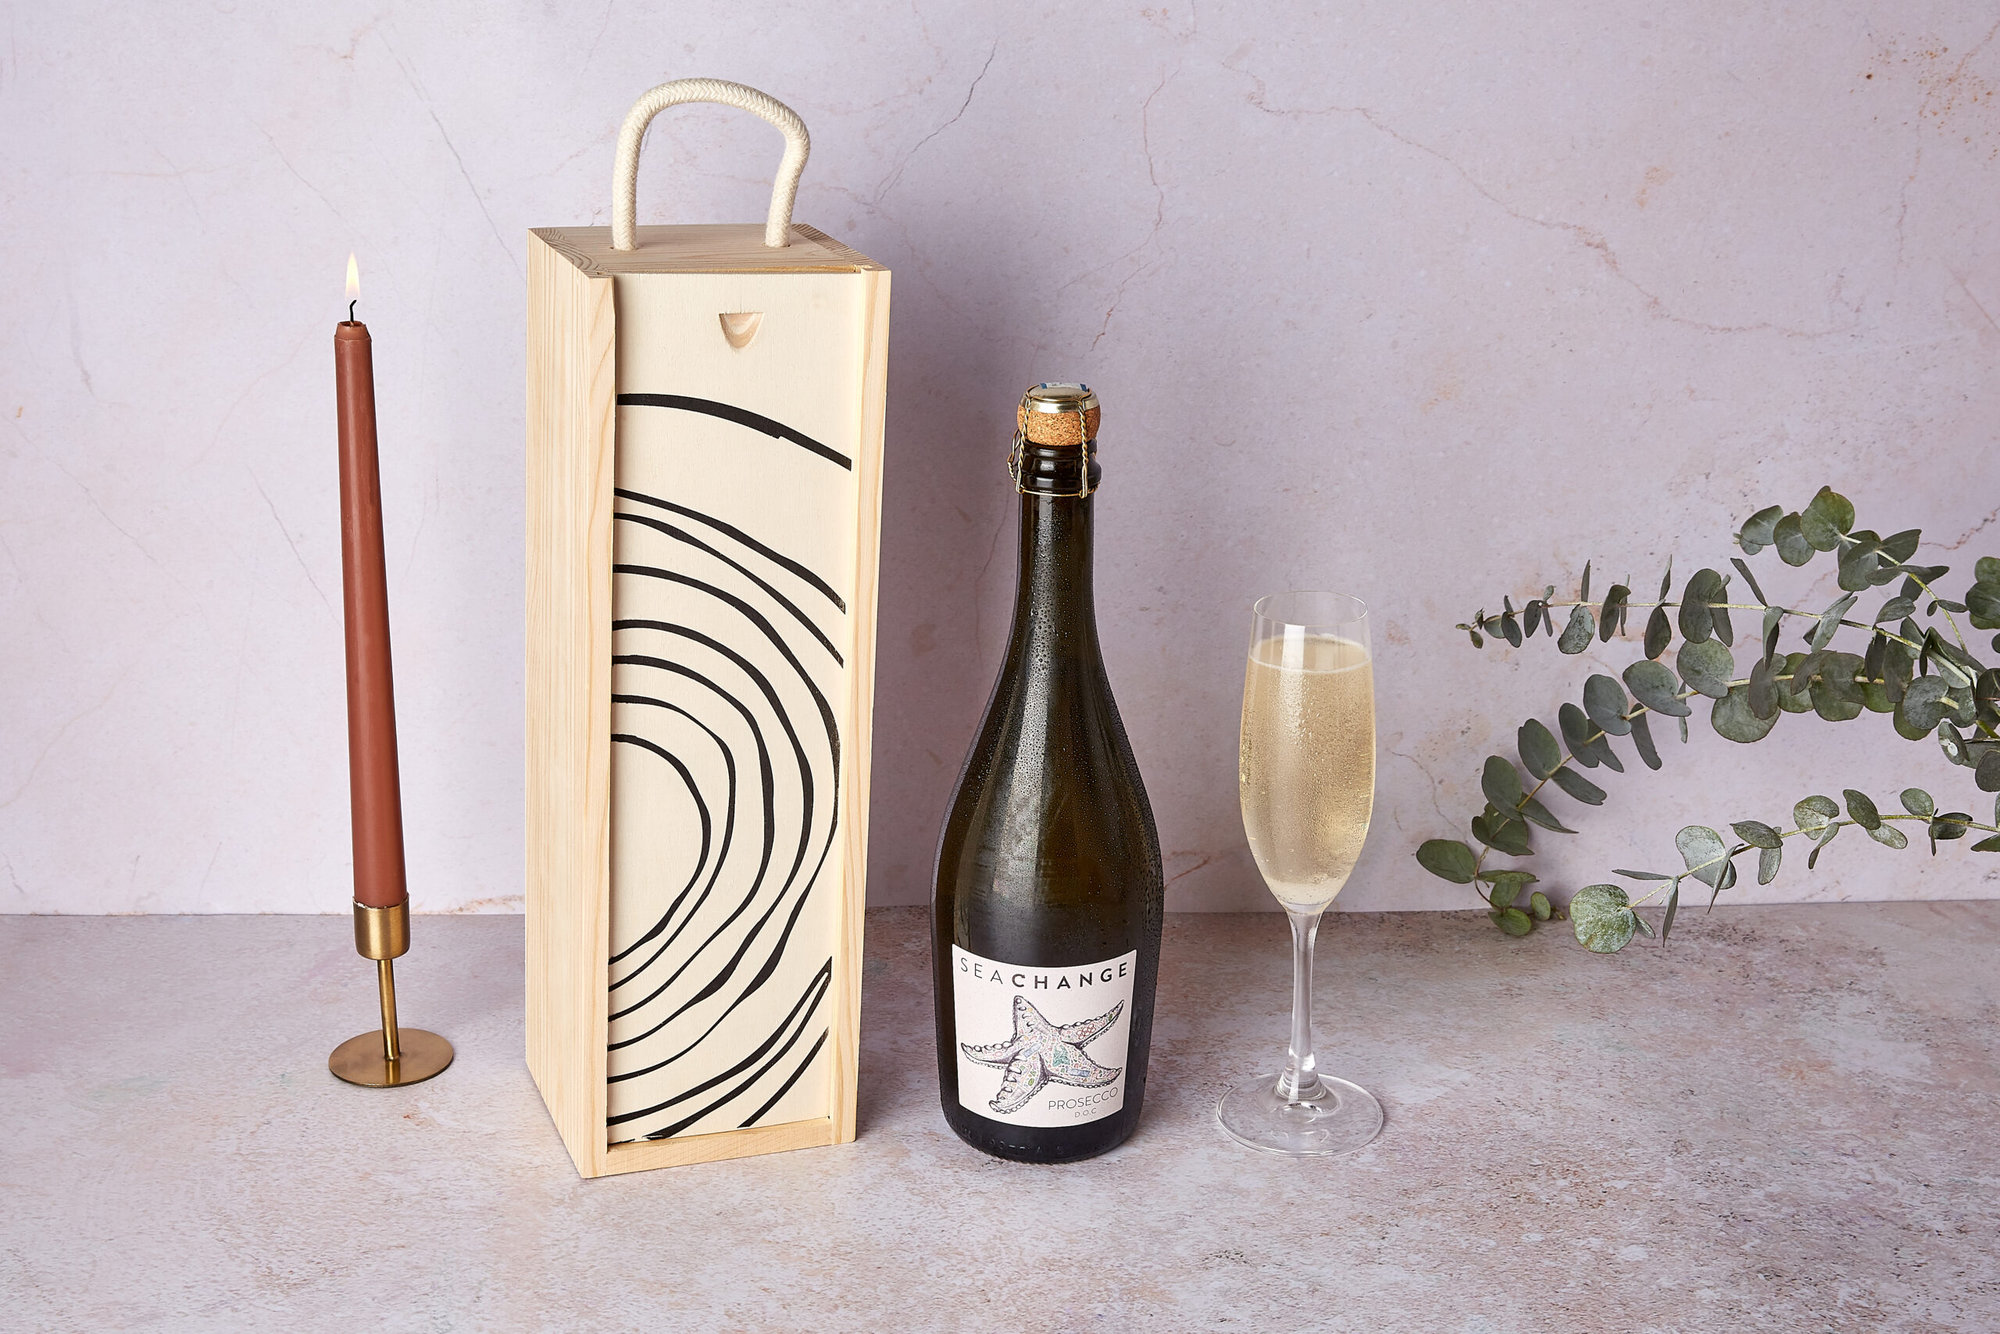 Build Your Own Wine Gift - Single Bottle